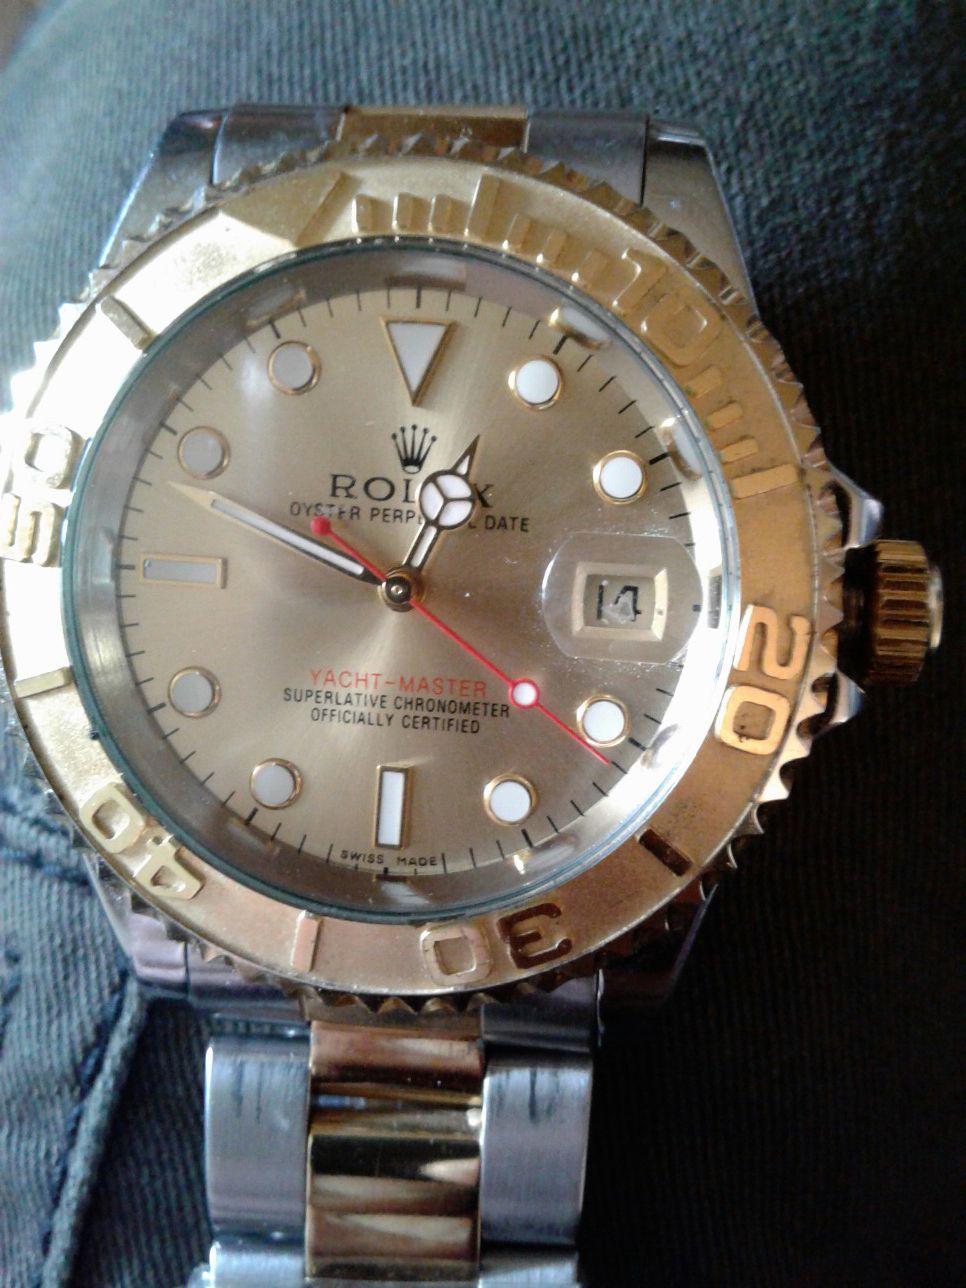 Rolex yacht master 16520 gold a Silver edition